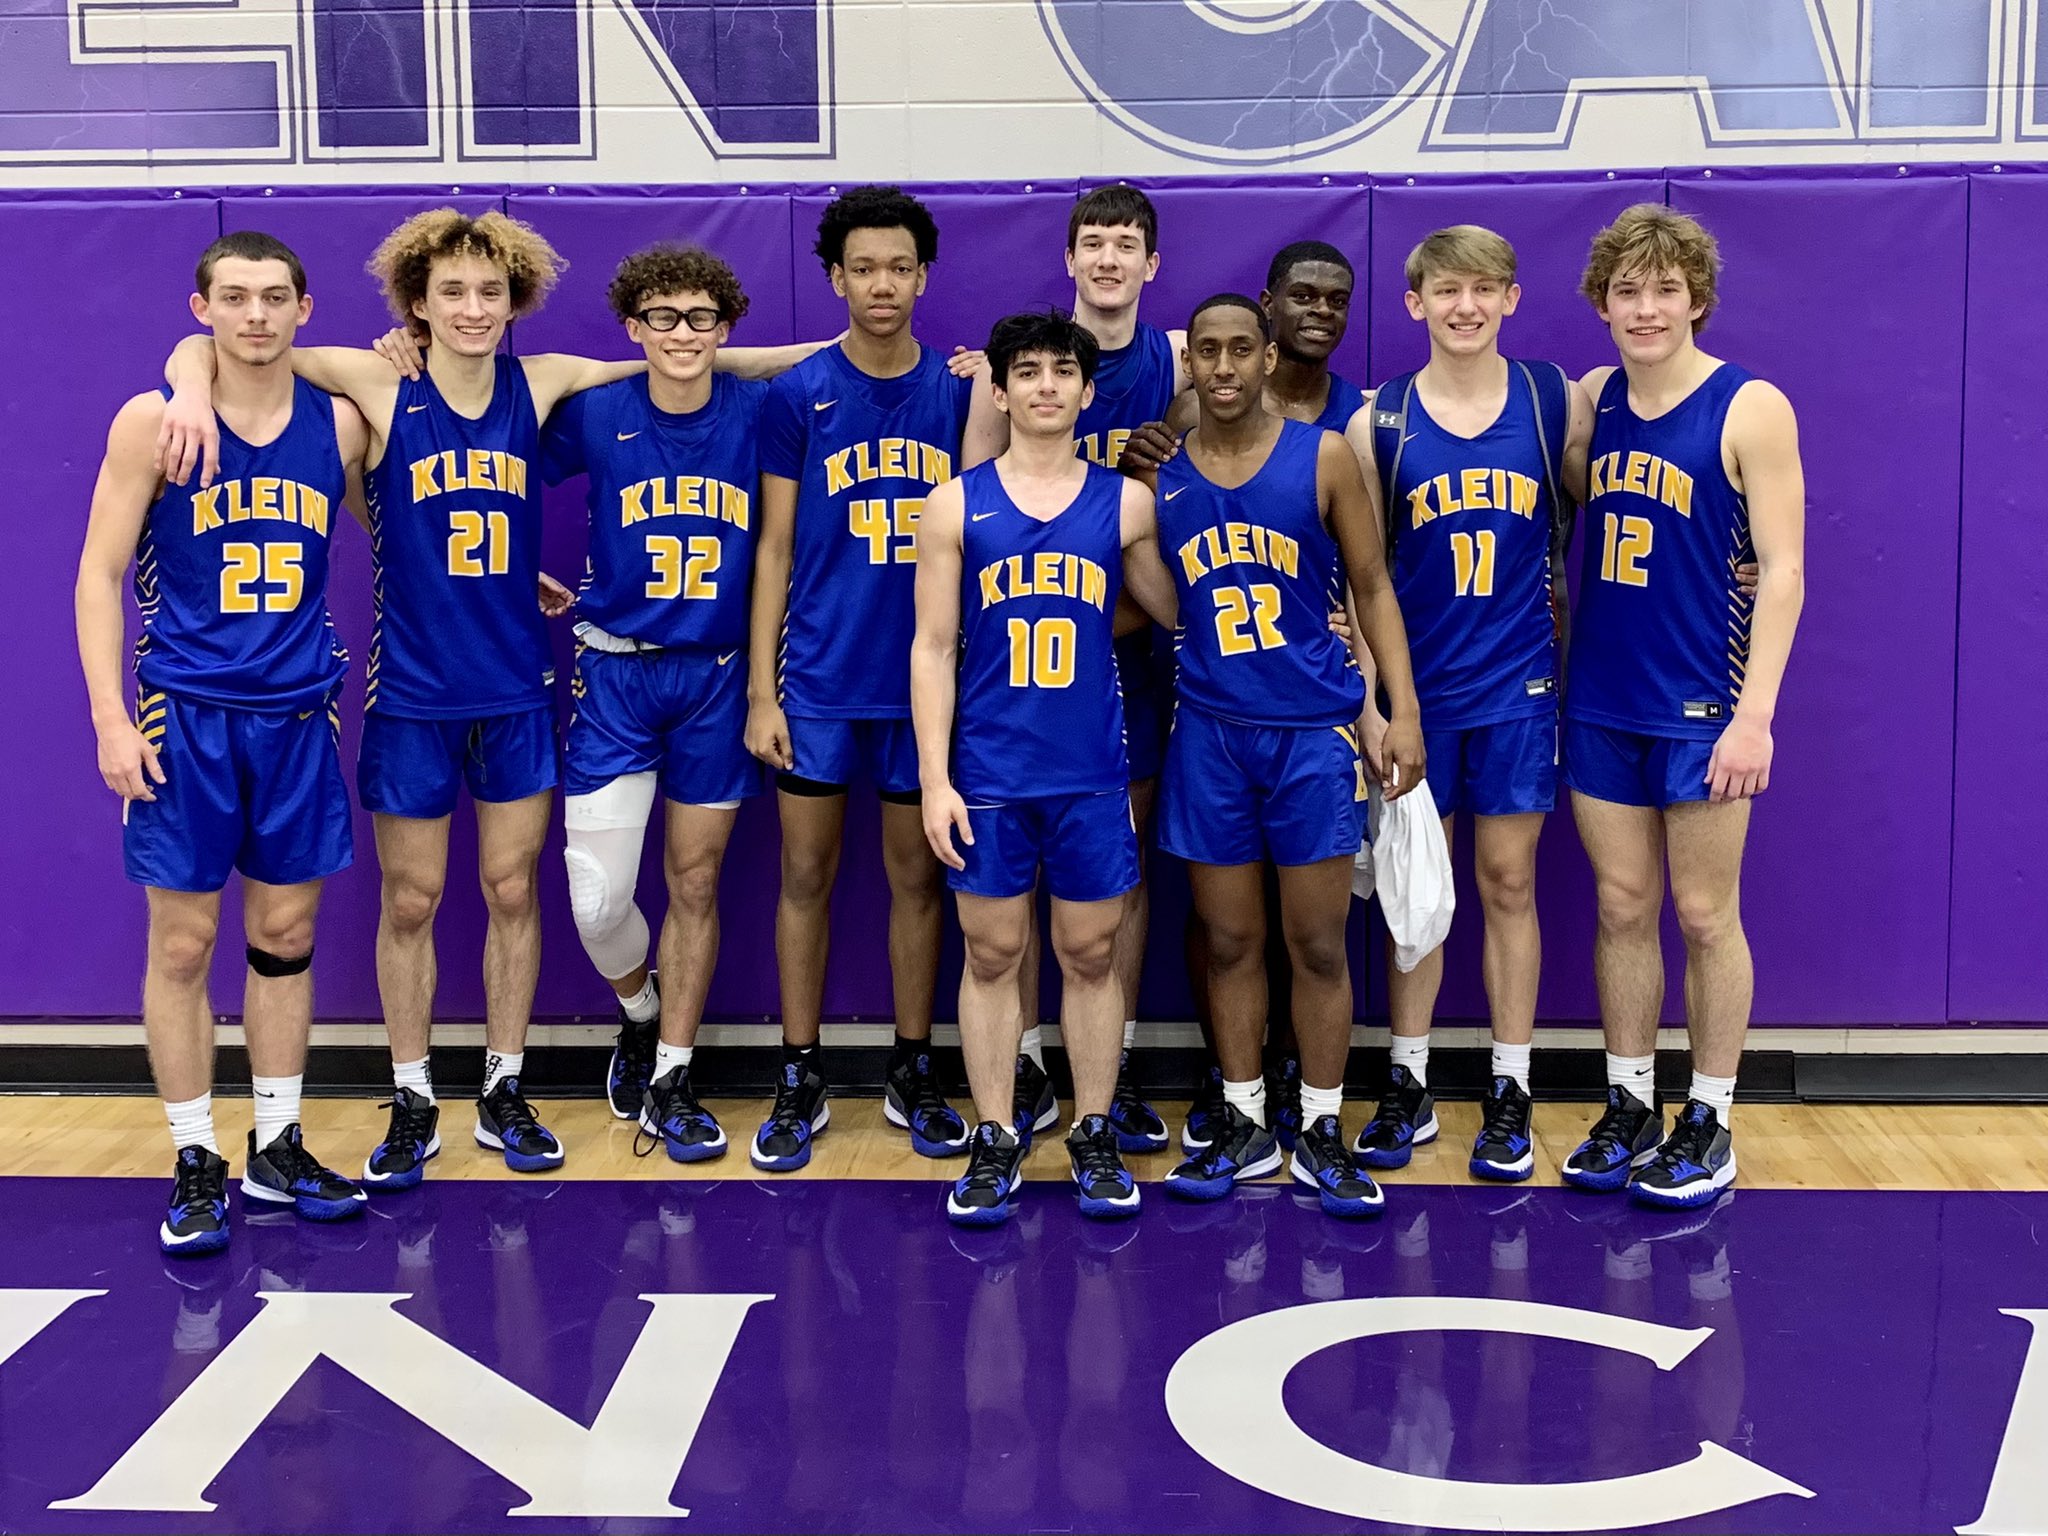 Klein High Basketball on Twitter: "Klein BearKats end districts with a win over Klein Cain. These guys a great 2021-22 season. Wednesday is a bye game then on to playoffs! @